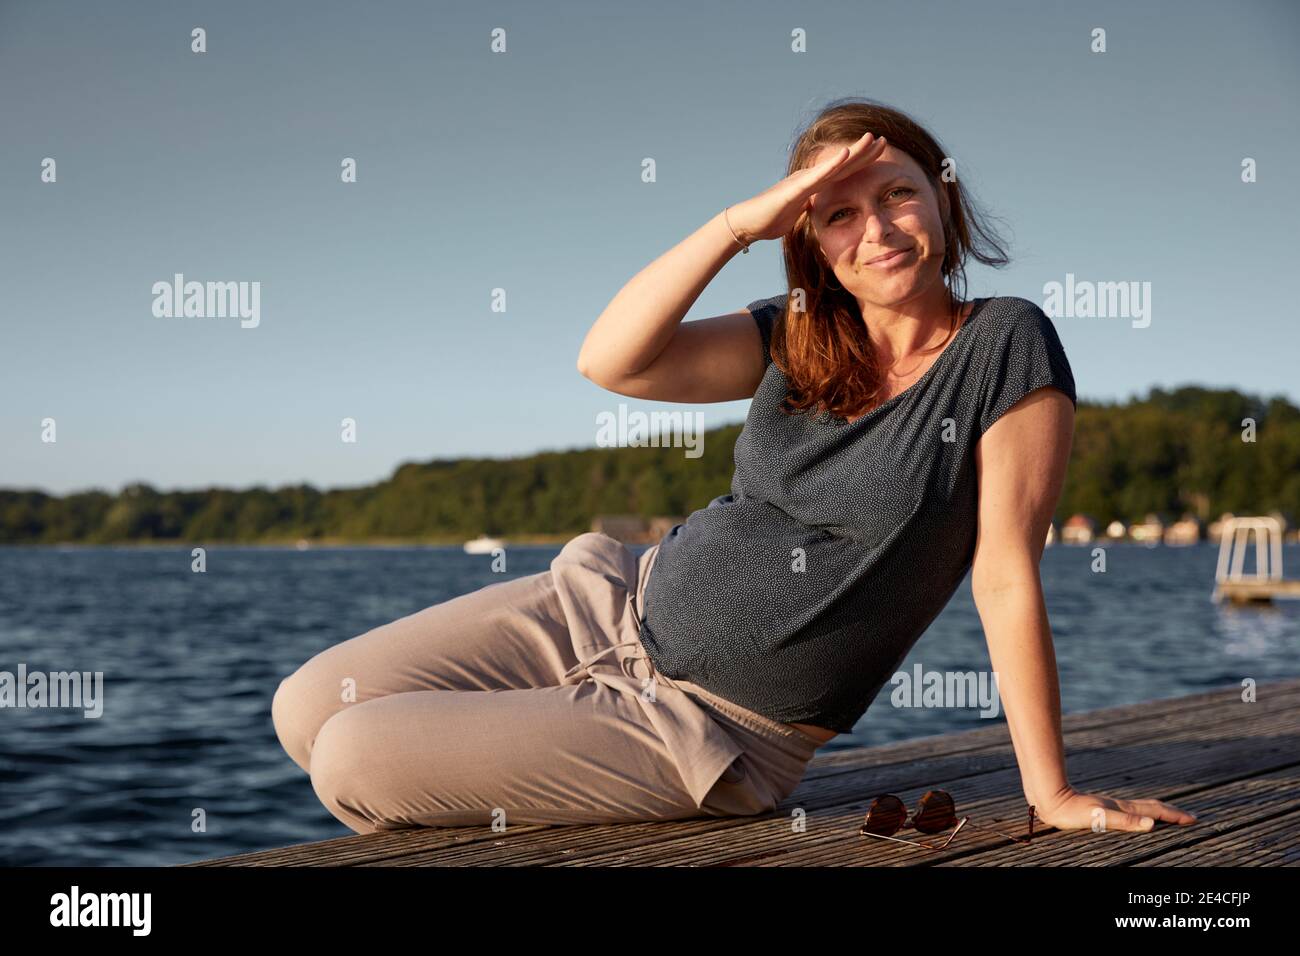 pregnant woman, landing stage, direct view Stock Photo